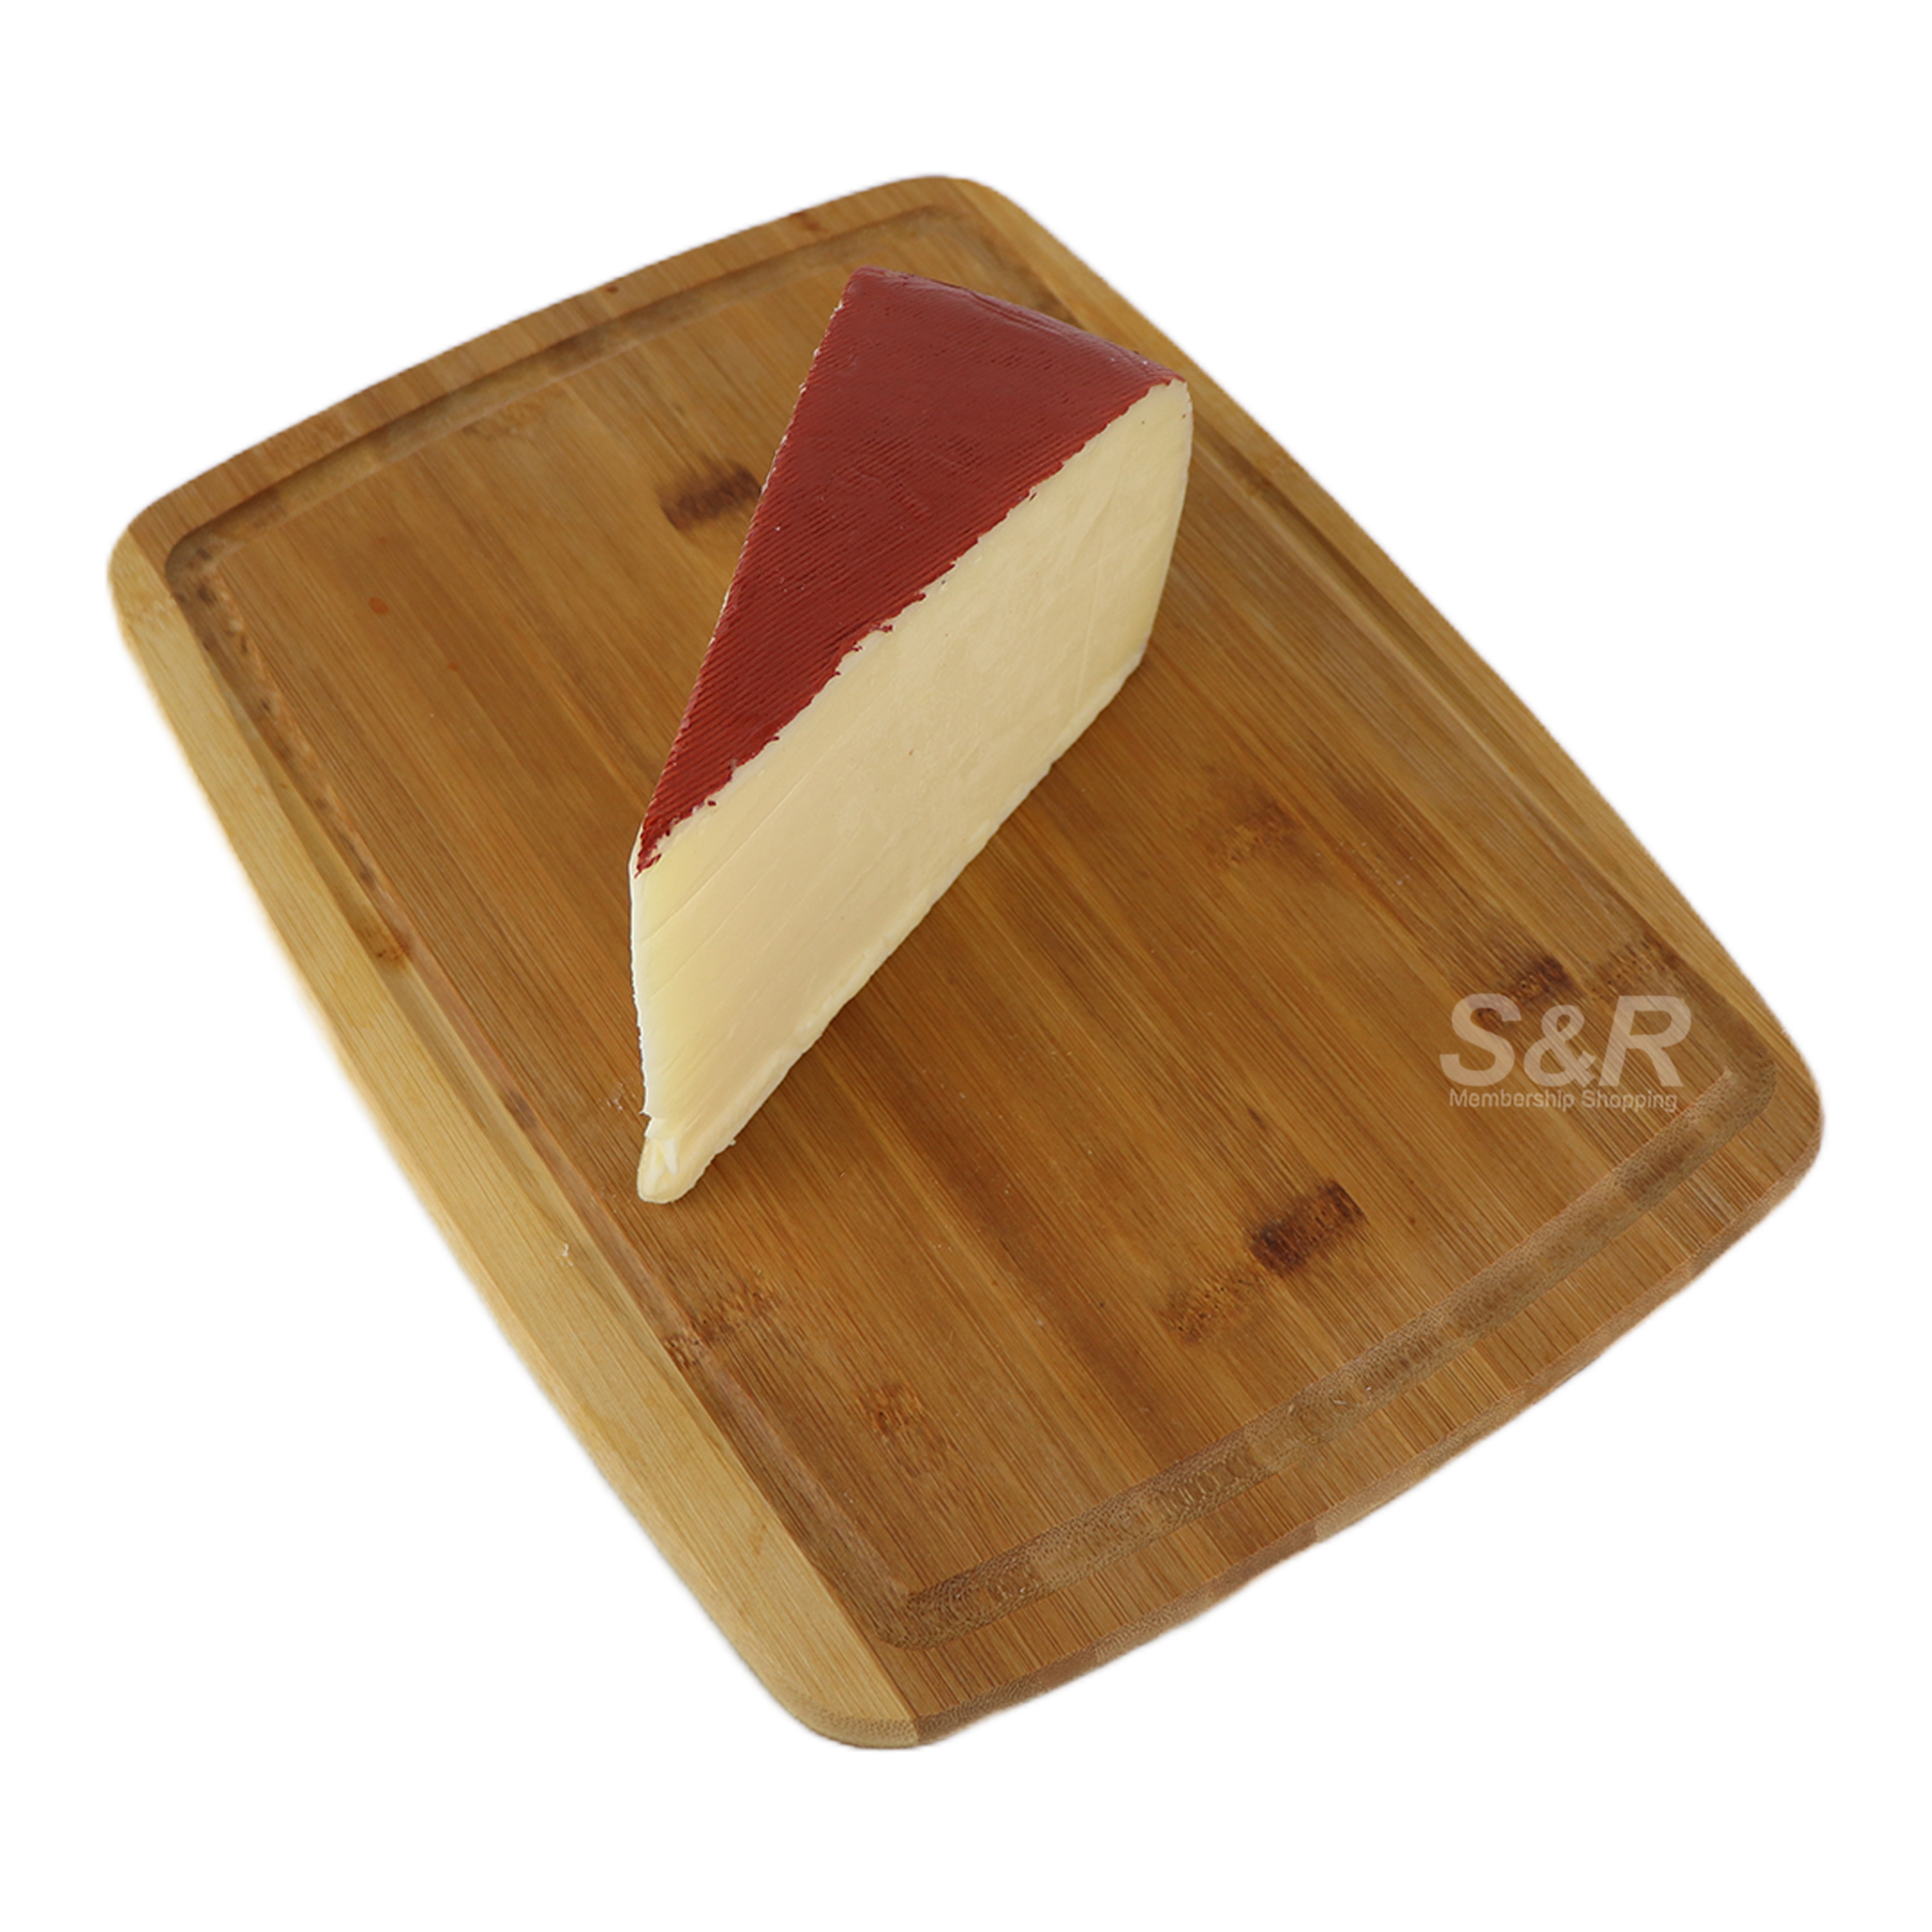 S&R Fontina Cheese approx. 500g